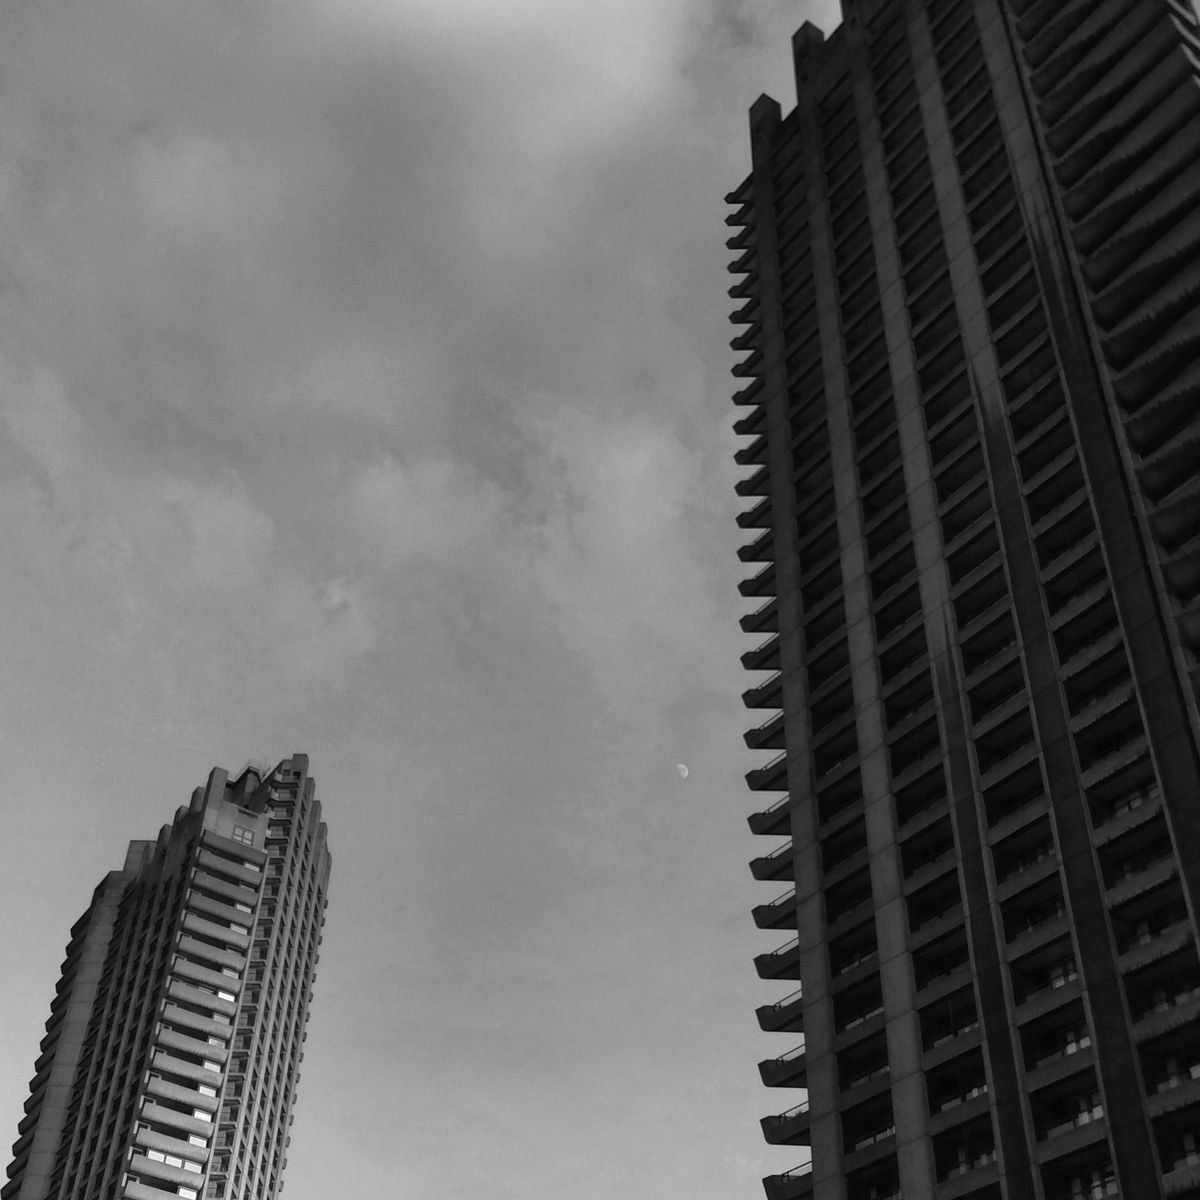 High Rise, 14x14 Inches, C-Type, Unframed by Amadeus Long